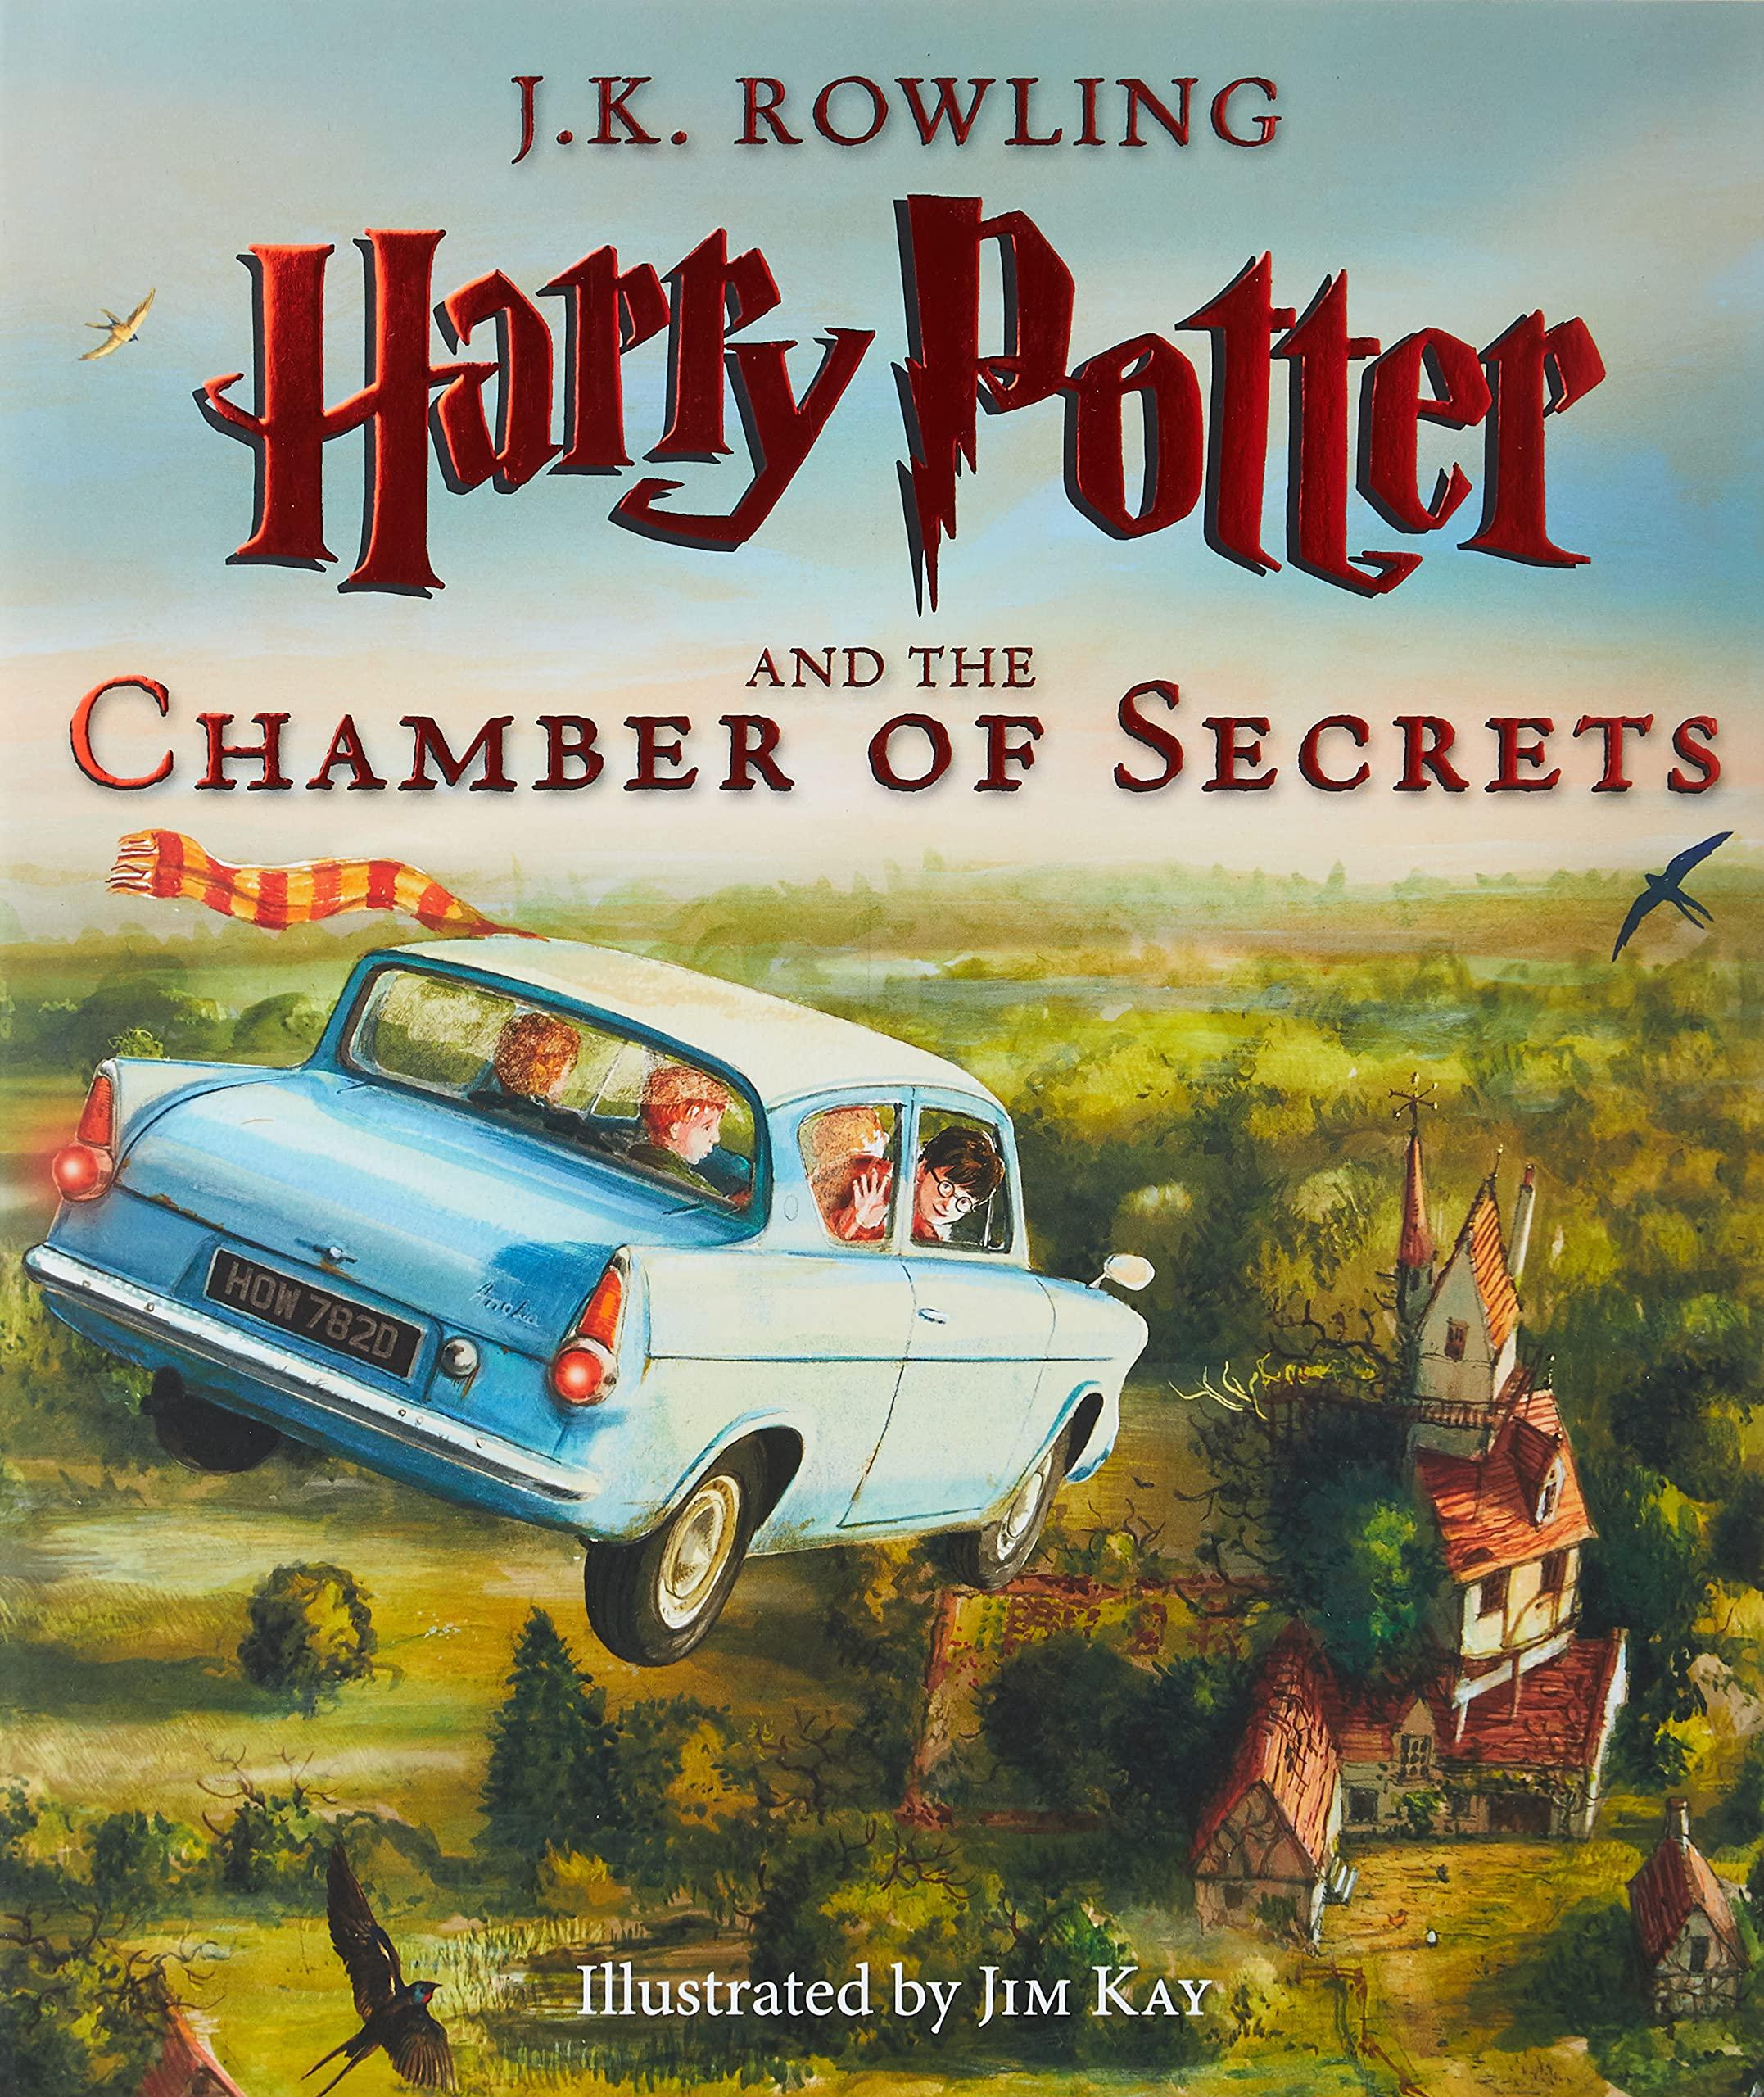 A Guide to the Characters of 'Harry Potter and the Chamber of Secrets' in Chronological Order